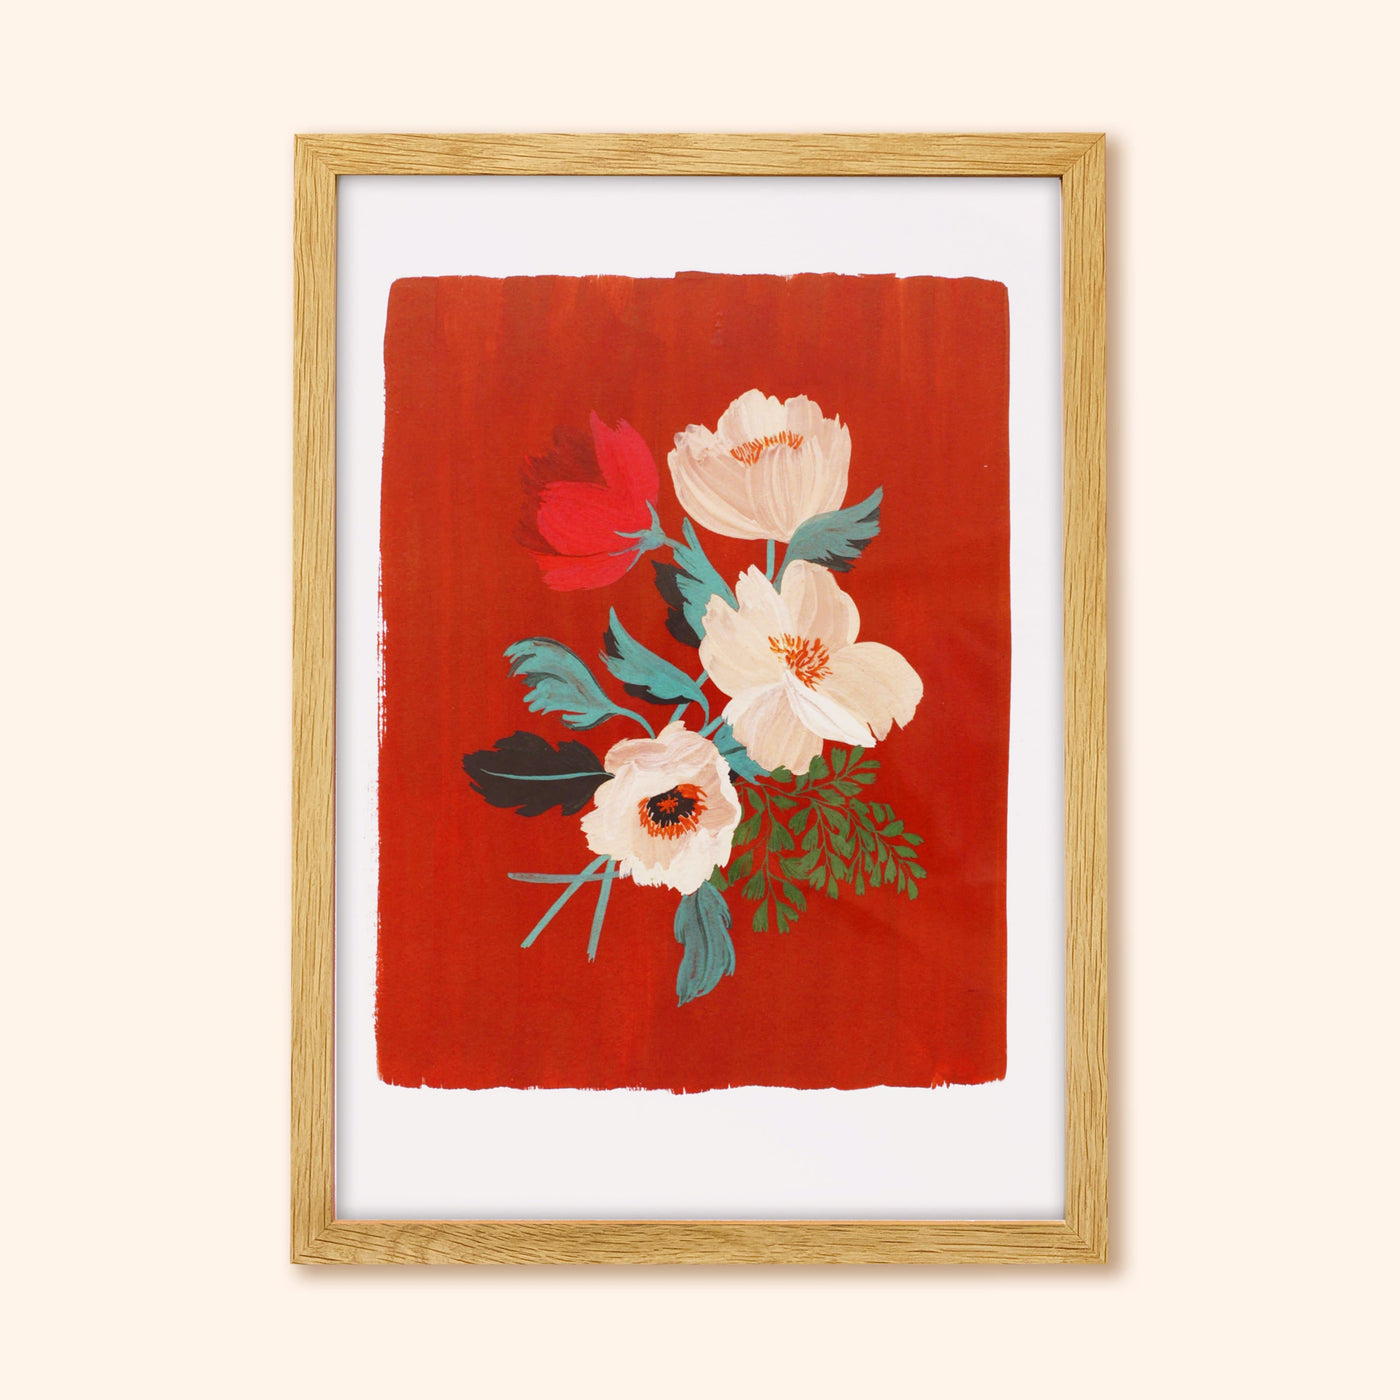 Red Floral Botanical Art Print With A Spray of Anemone Flowers On A Deep Red Background In A Light Oak Frame - Annie Dornan Smith